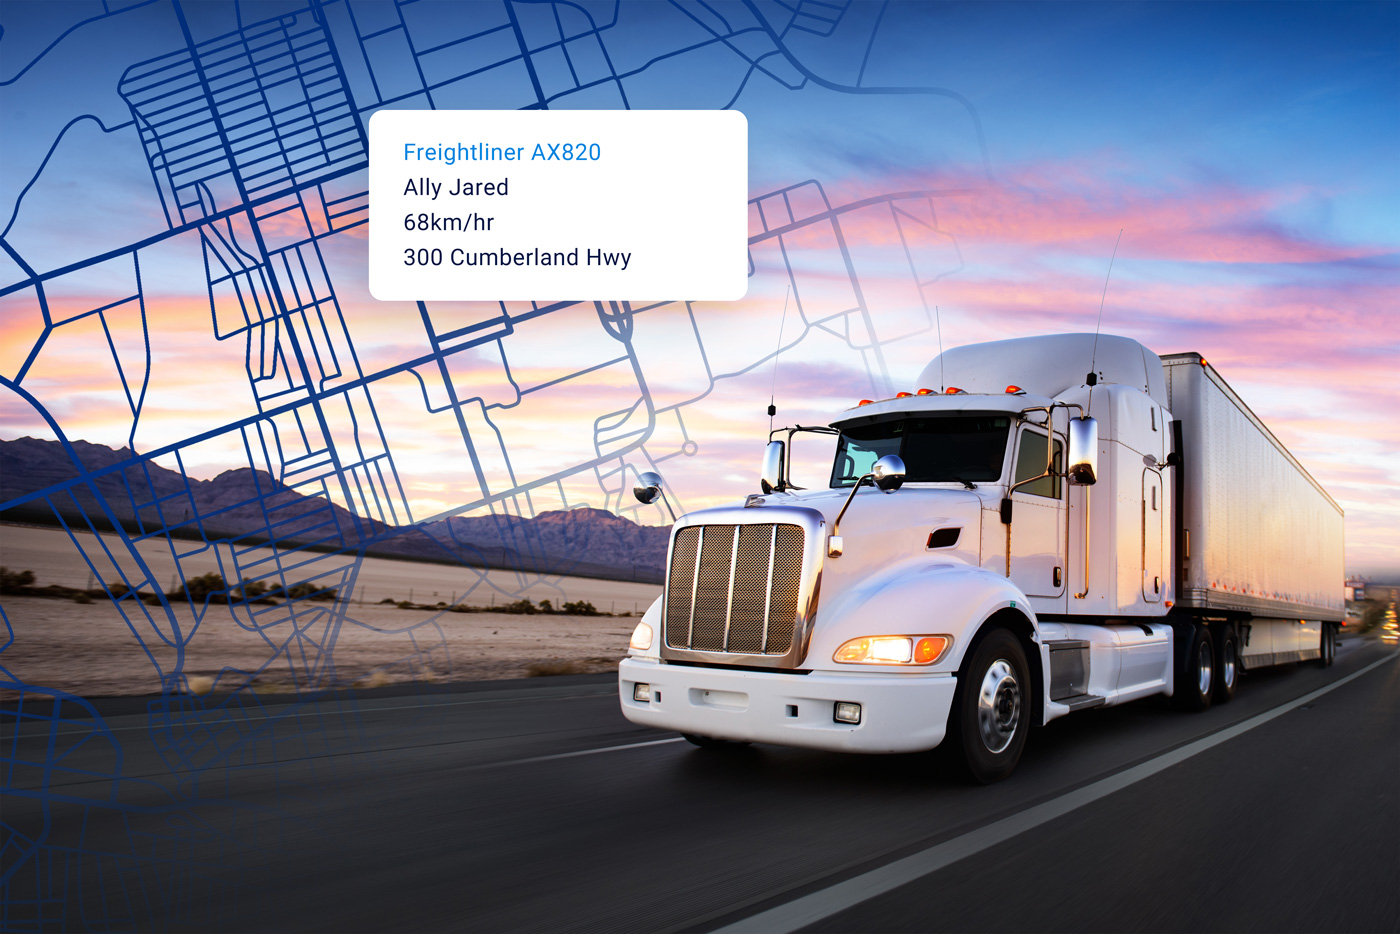 How to track your truck in real time with Teletrack app